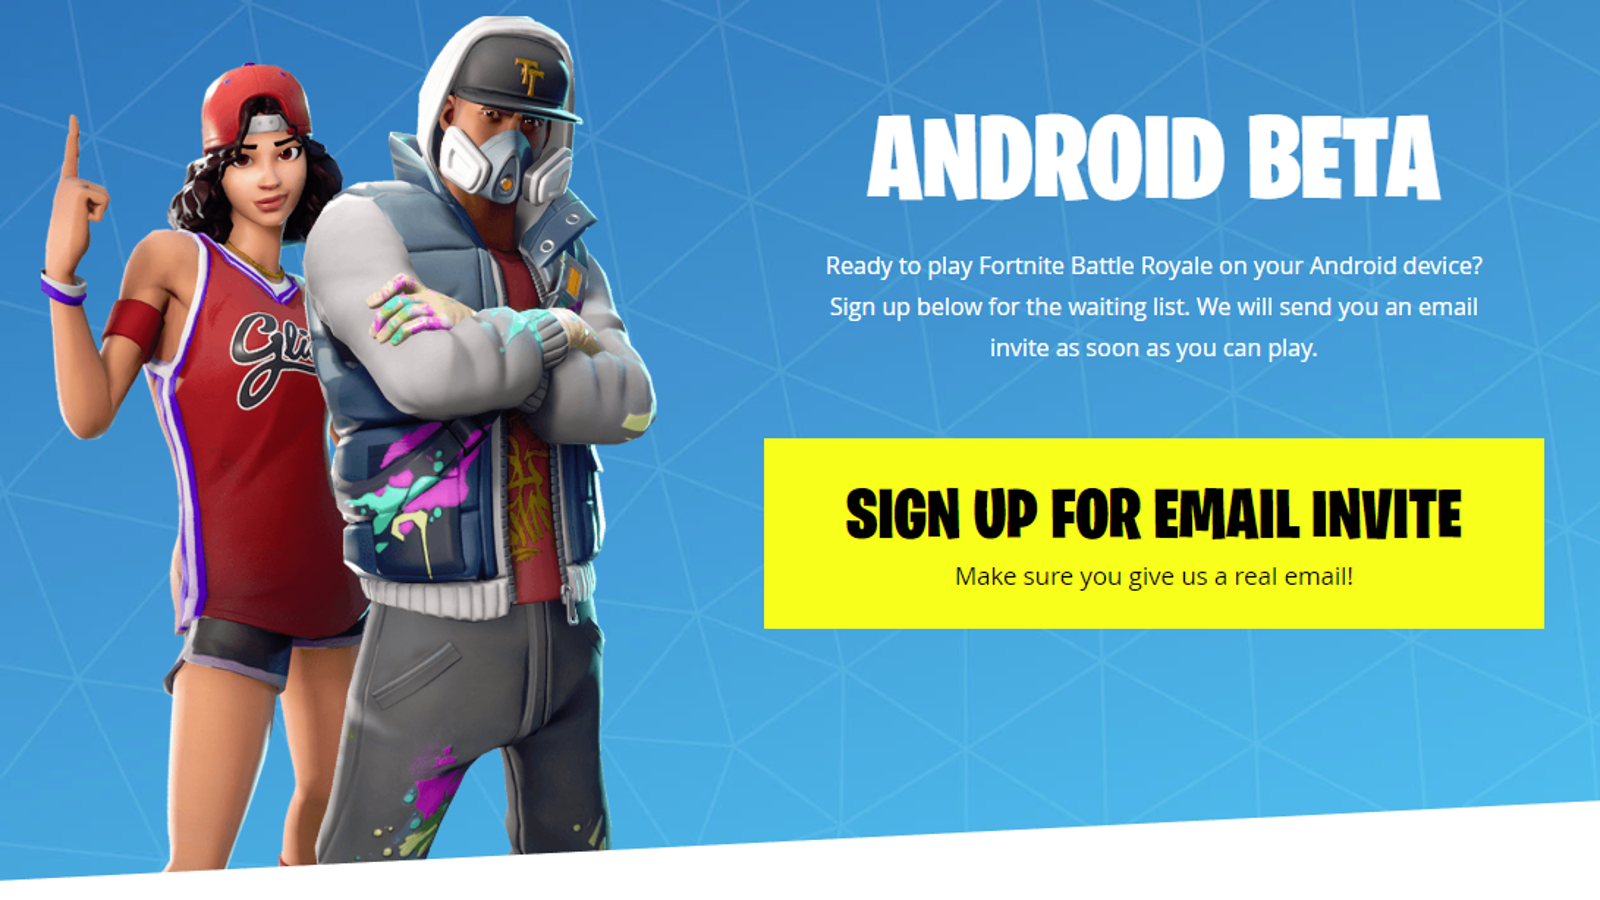 Here's How to Get Fortnite on Your Android Phone